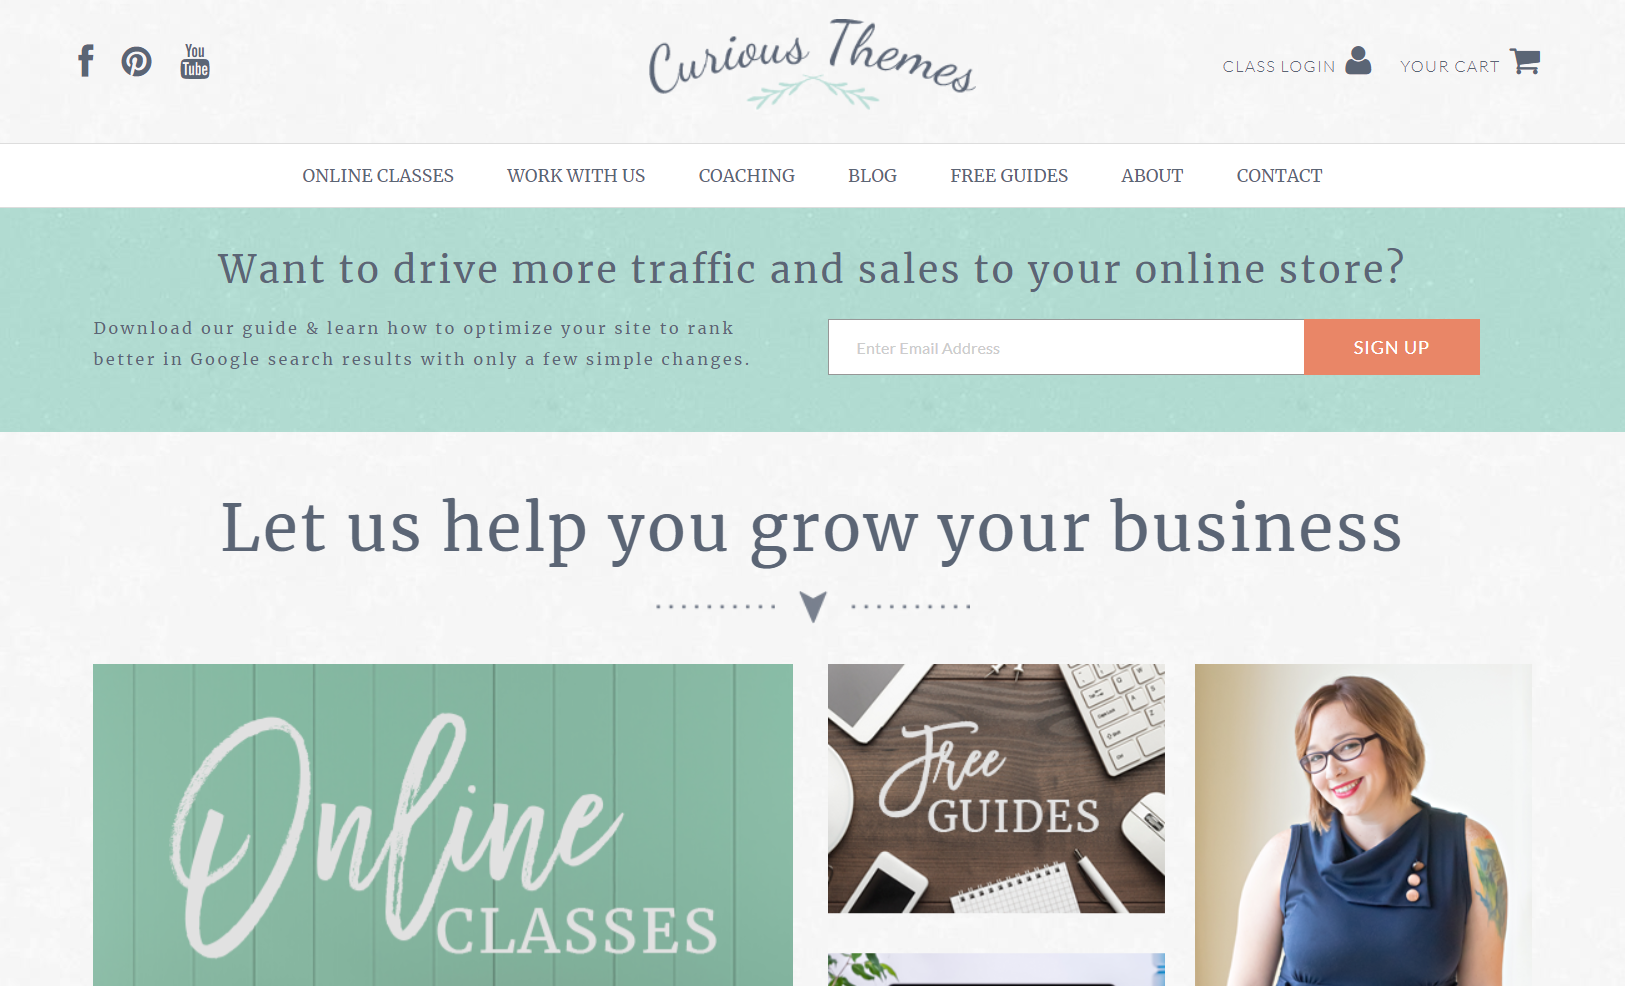 Curious Themes uses the Shopify platform to help businesses grow their online sales.